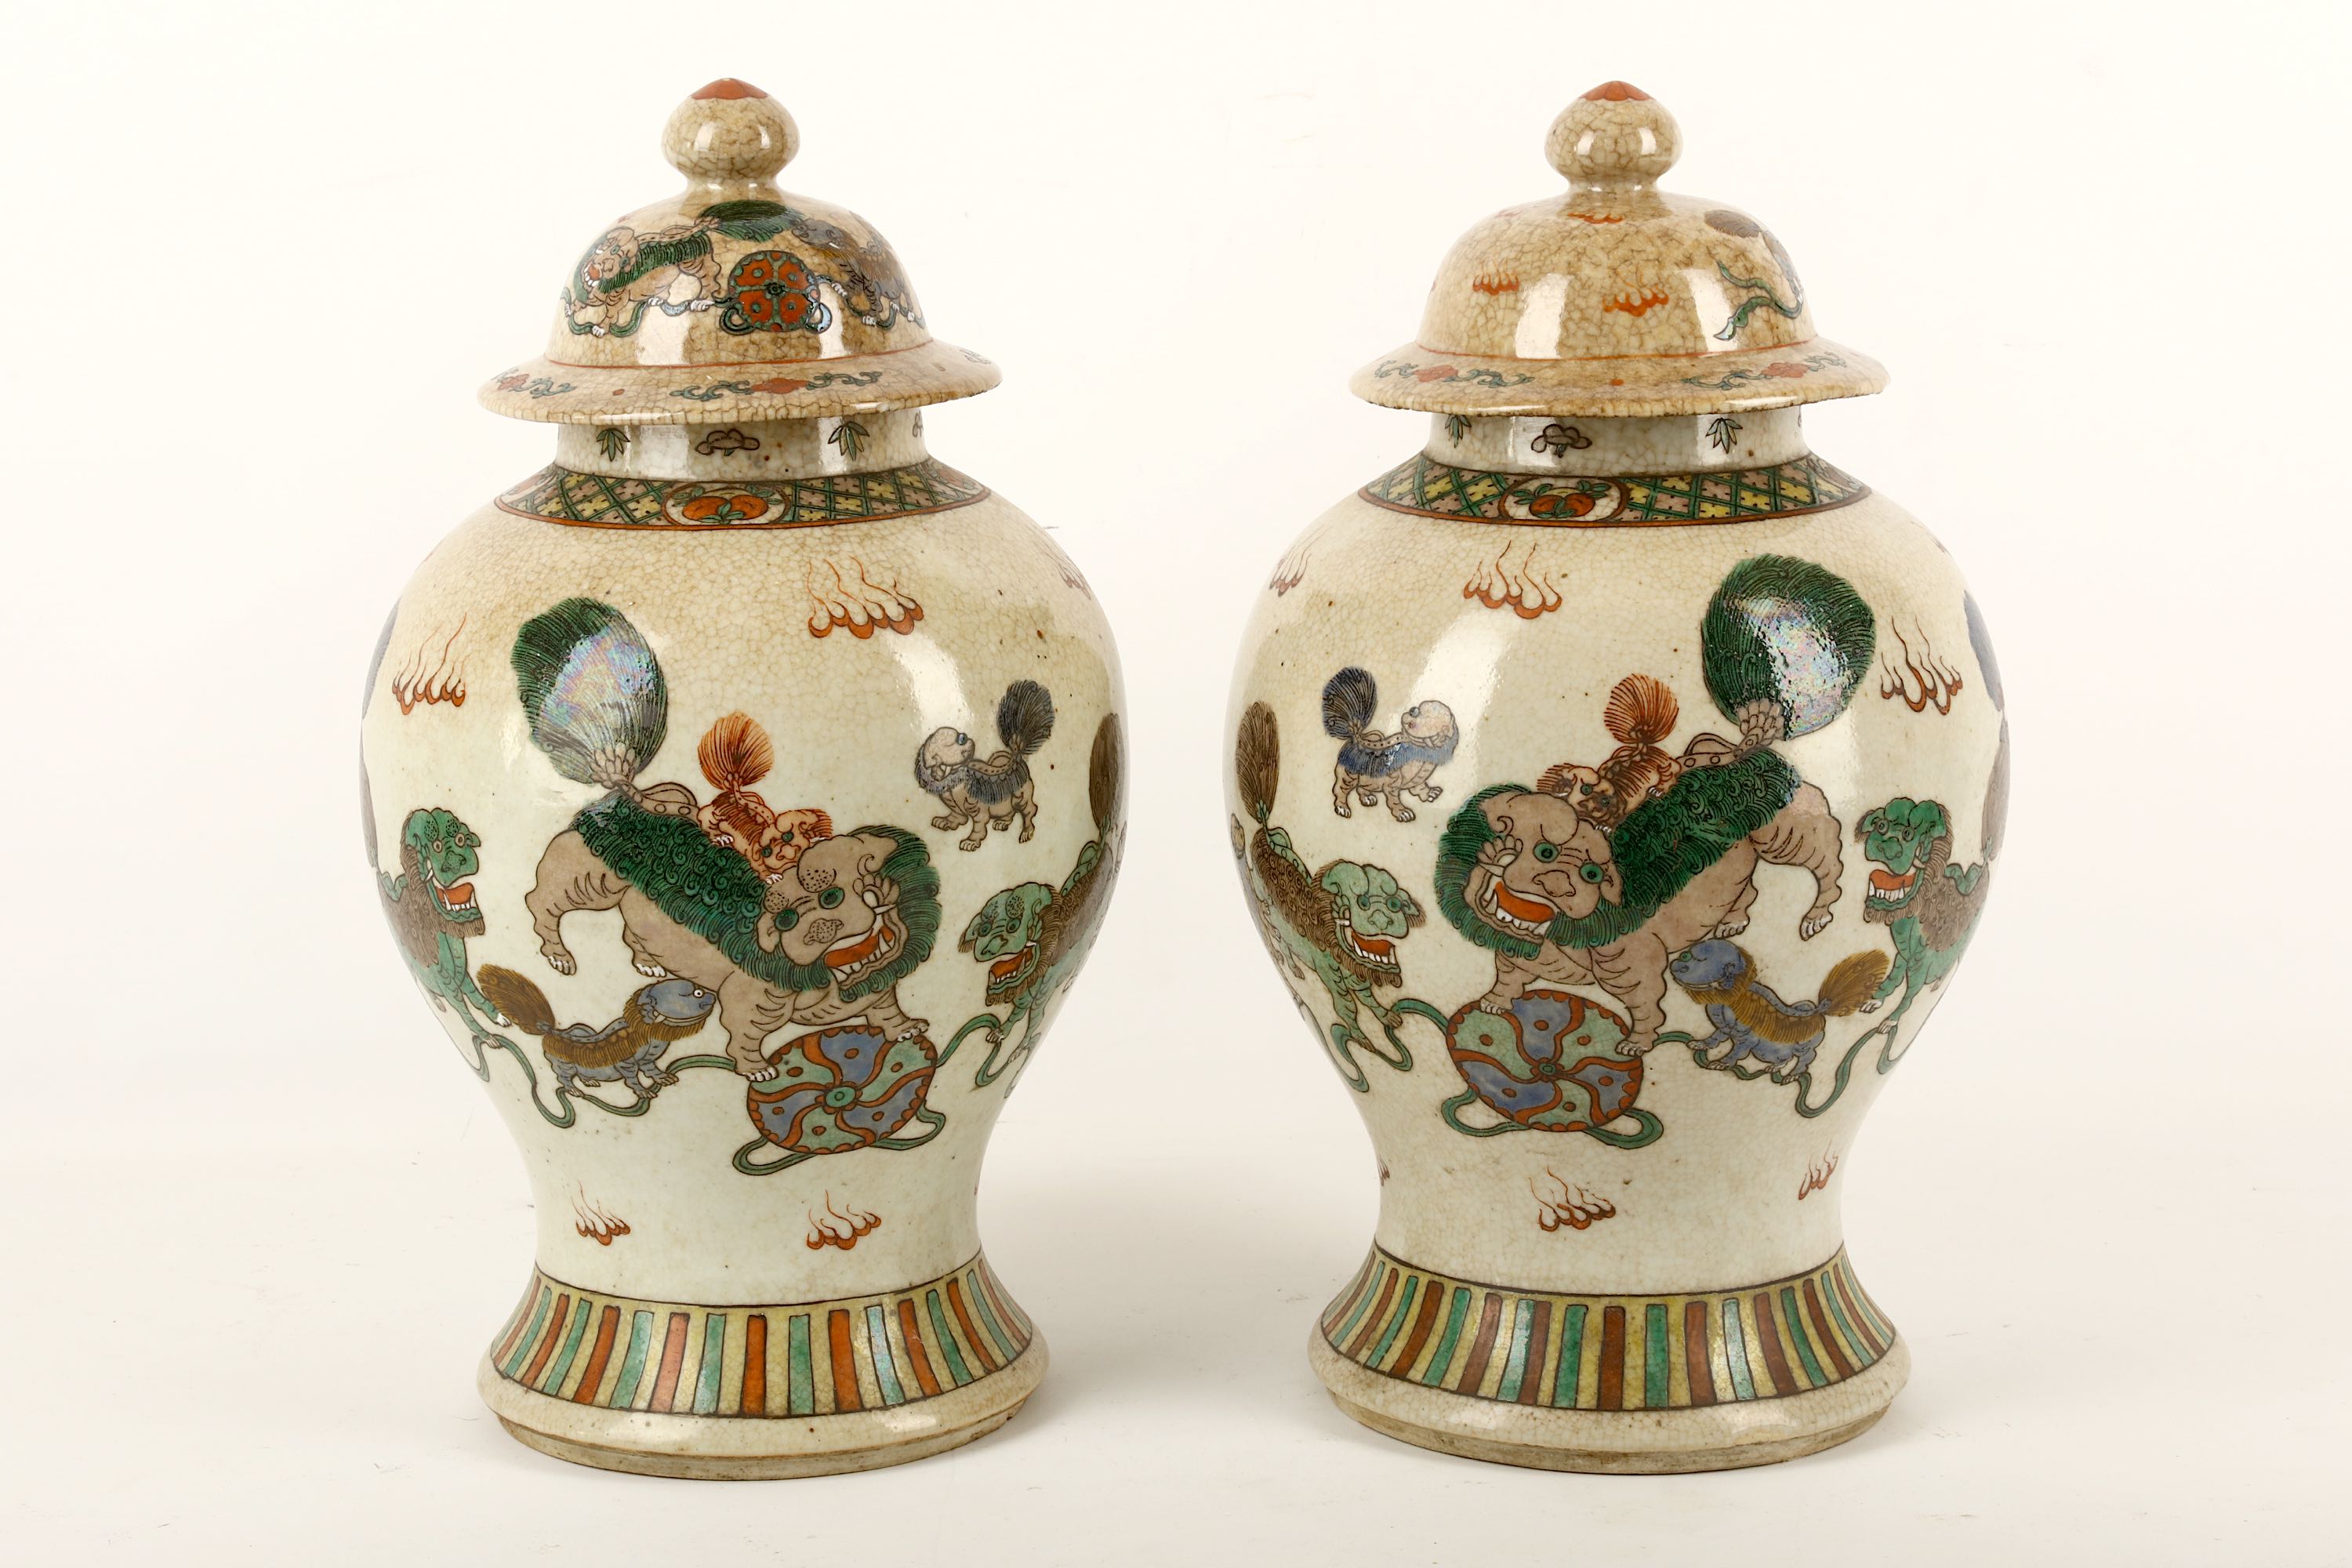 A pair of Chinese baluster crackle glazed vases and covers, Guangxu period, late 19th or early